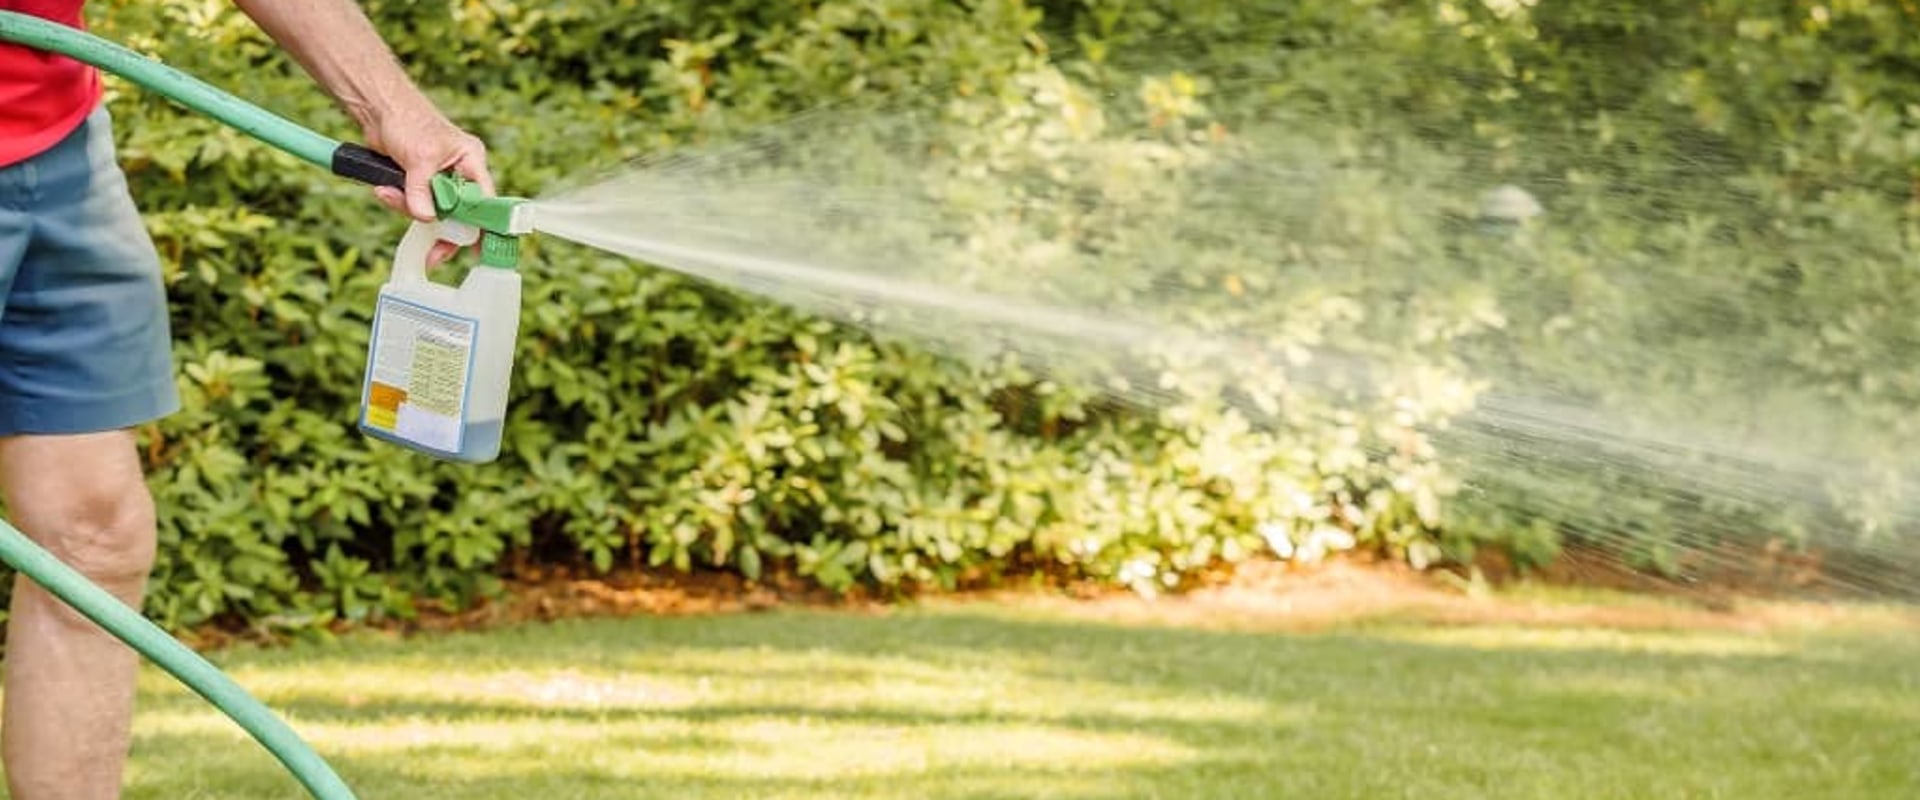 When to apply bug control for lawns?